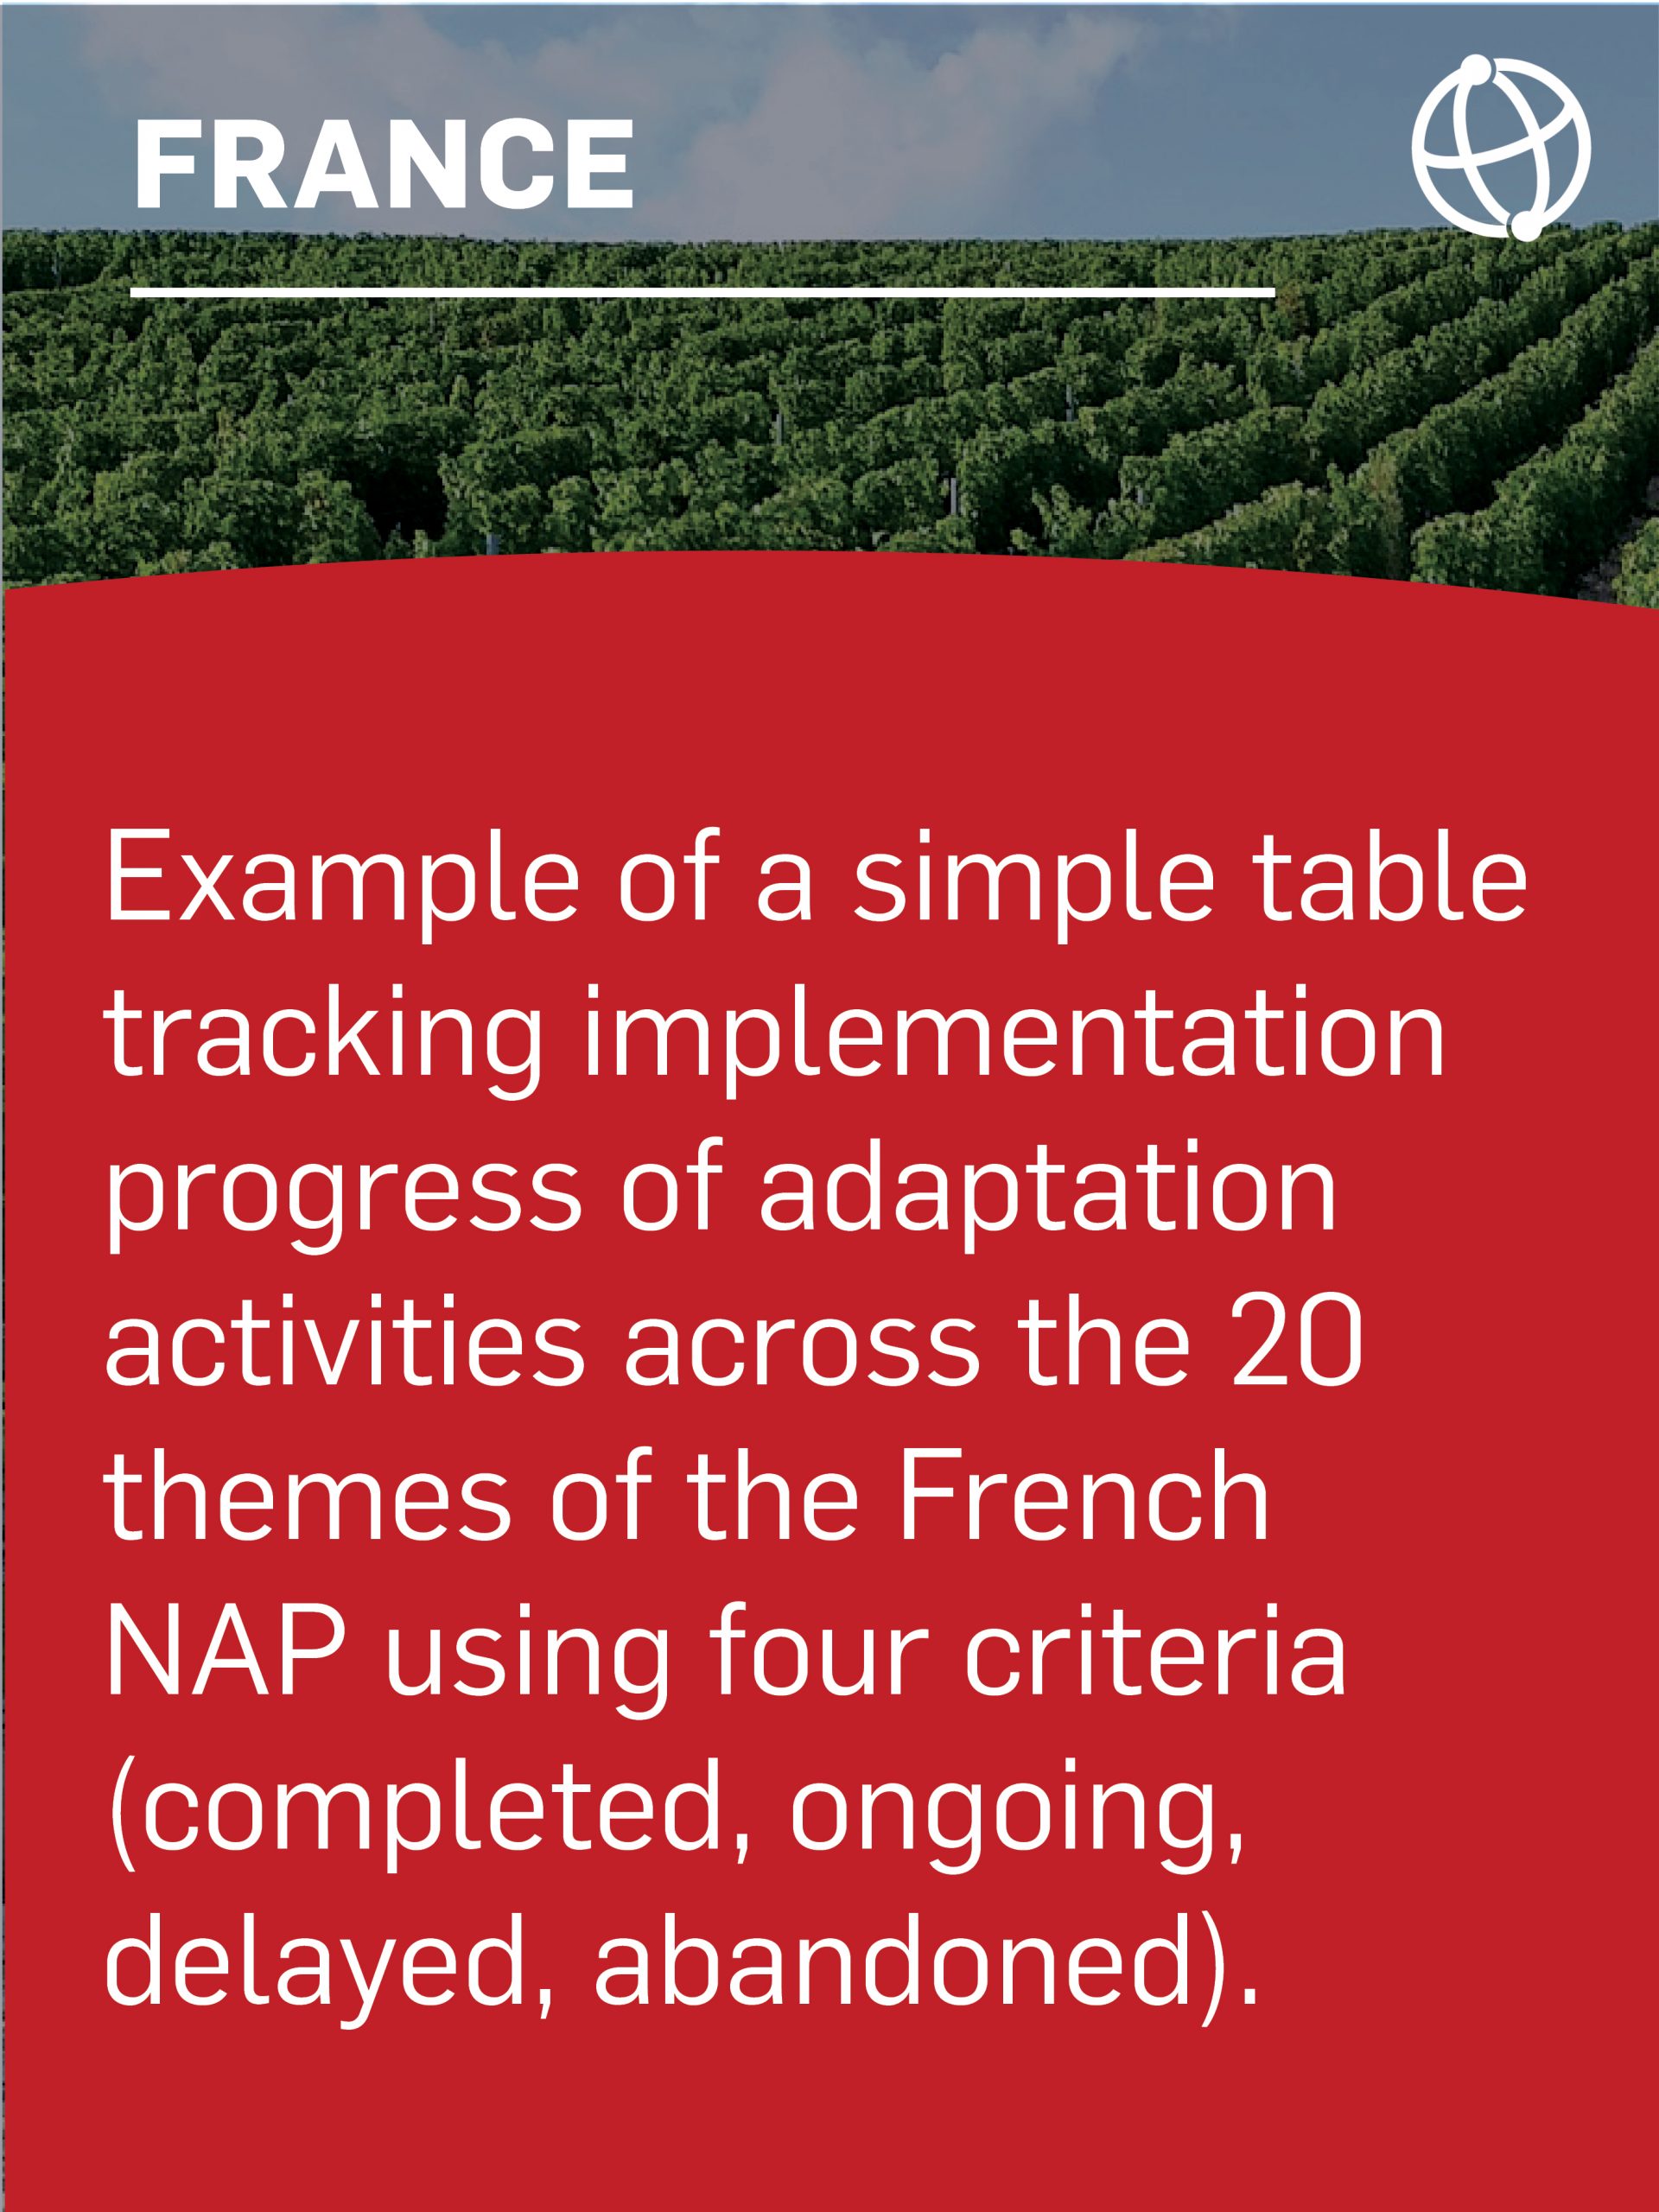 Example of a simple table tracking implementation progress of adaptation activities across the 20 themes of the French NAP using four criteria (completed, ongoing, delayed, abandoned).